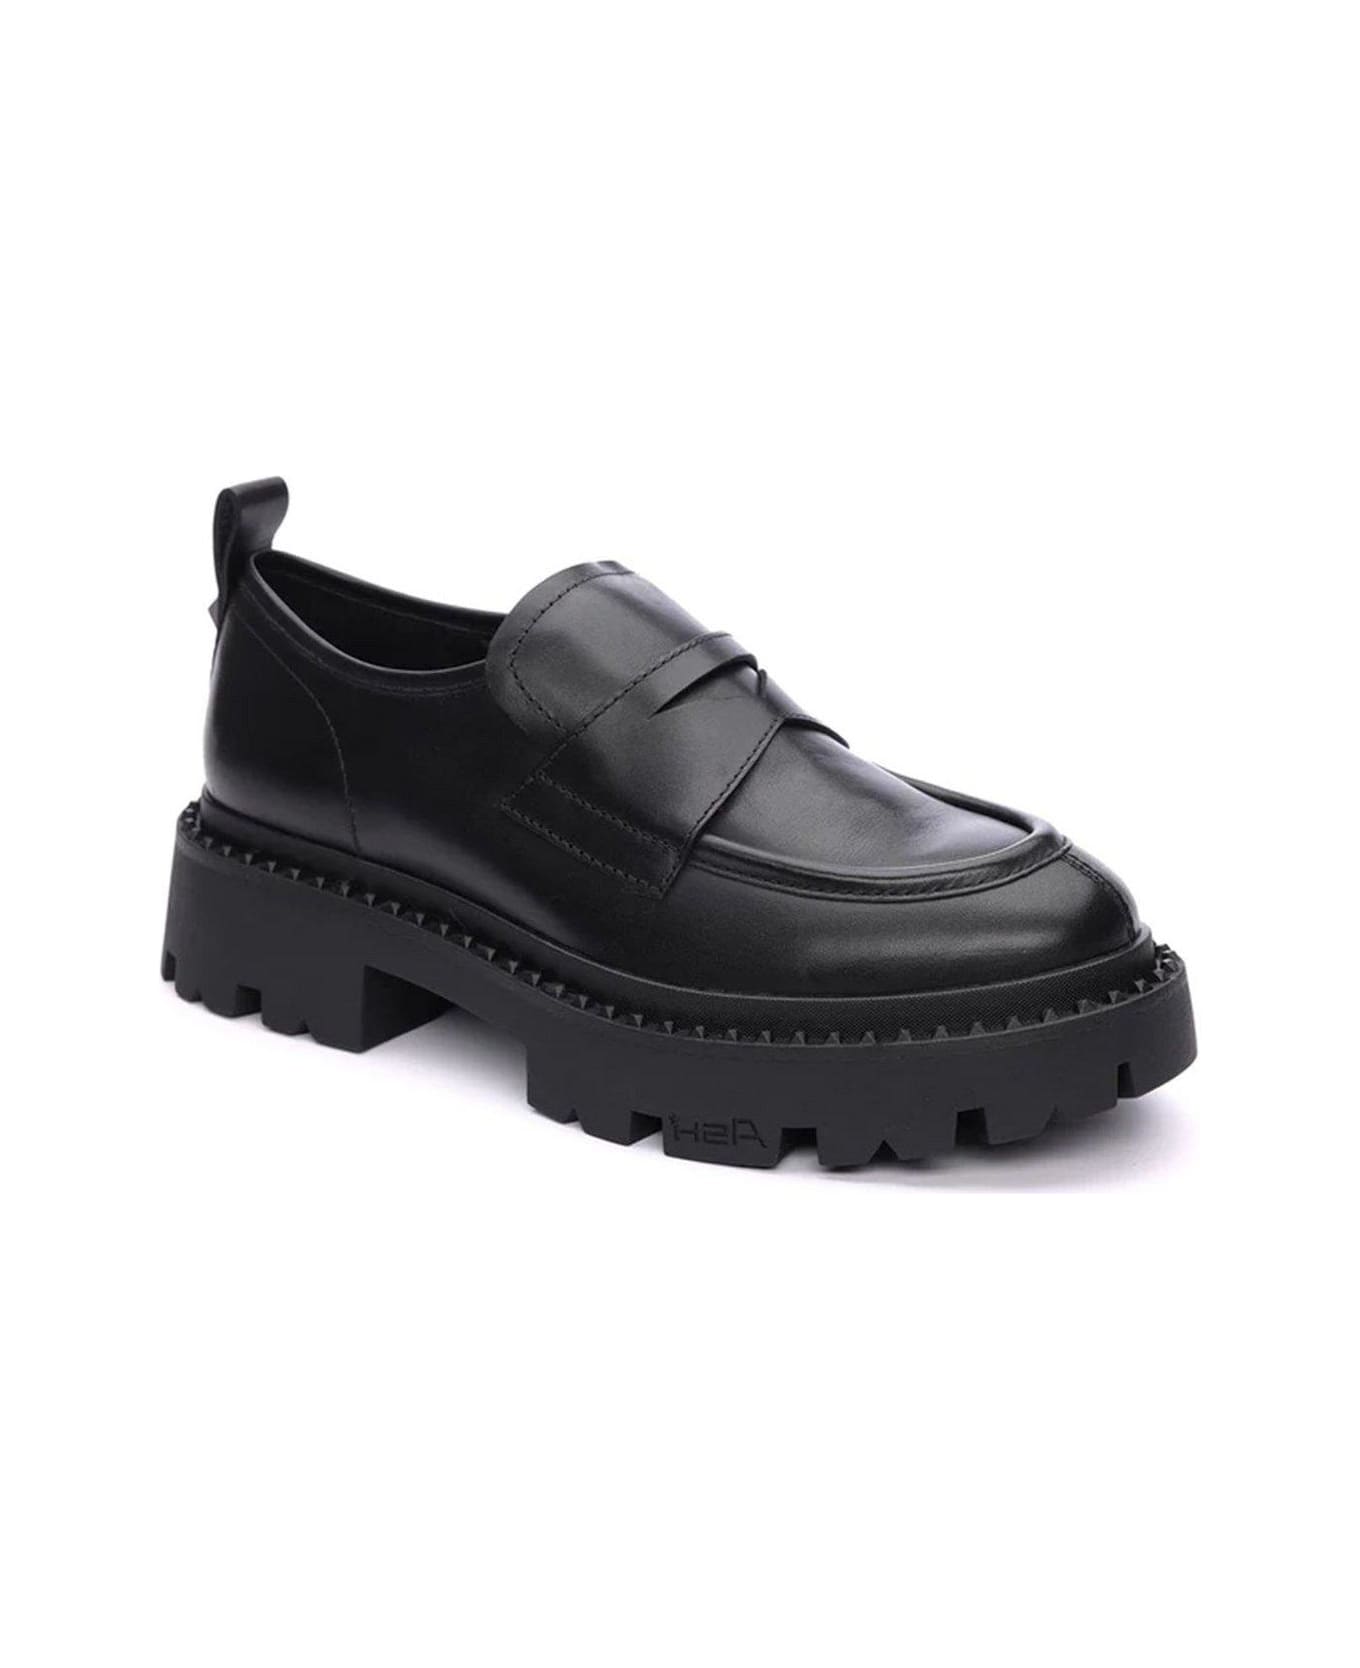 Ash Stud-detailed Slip-on Loafers Flat Shoes - NERO フラットシューズ